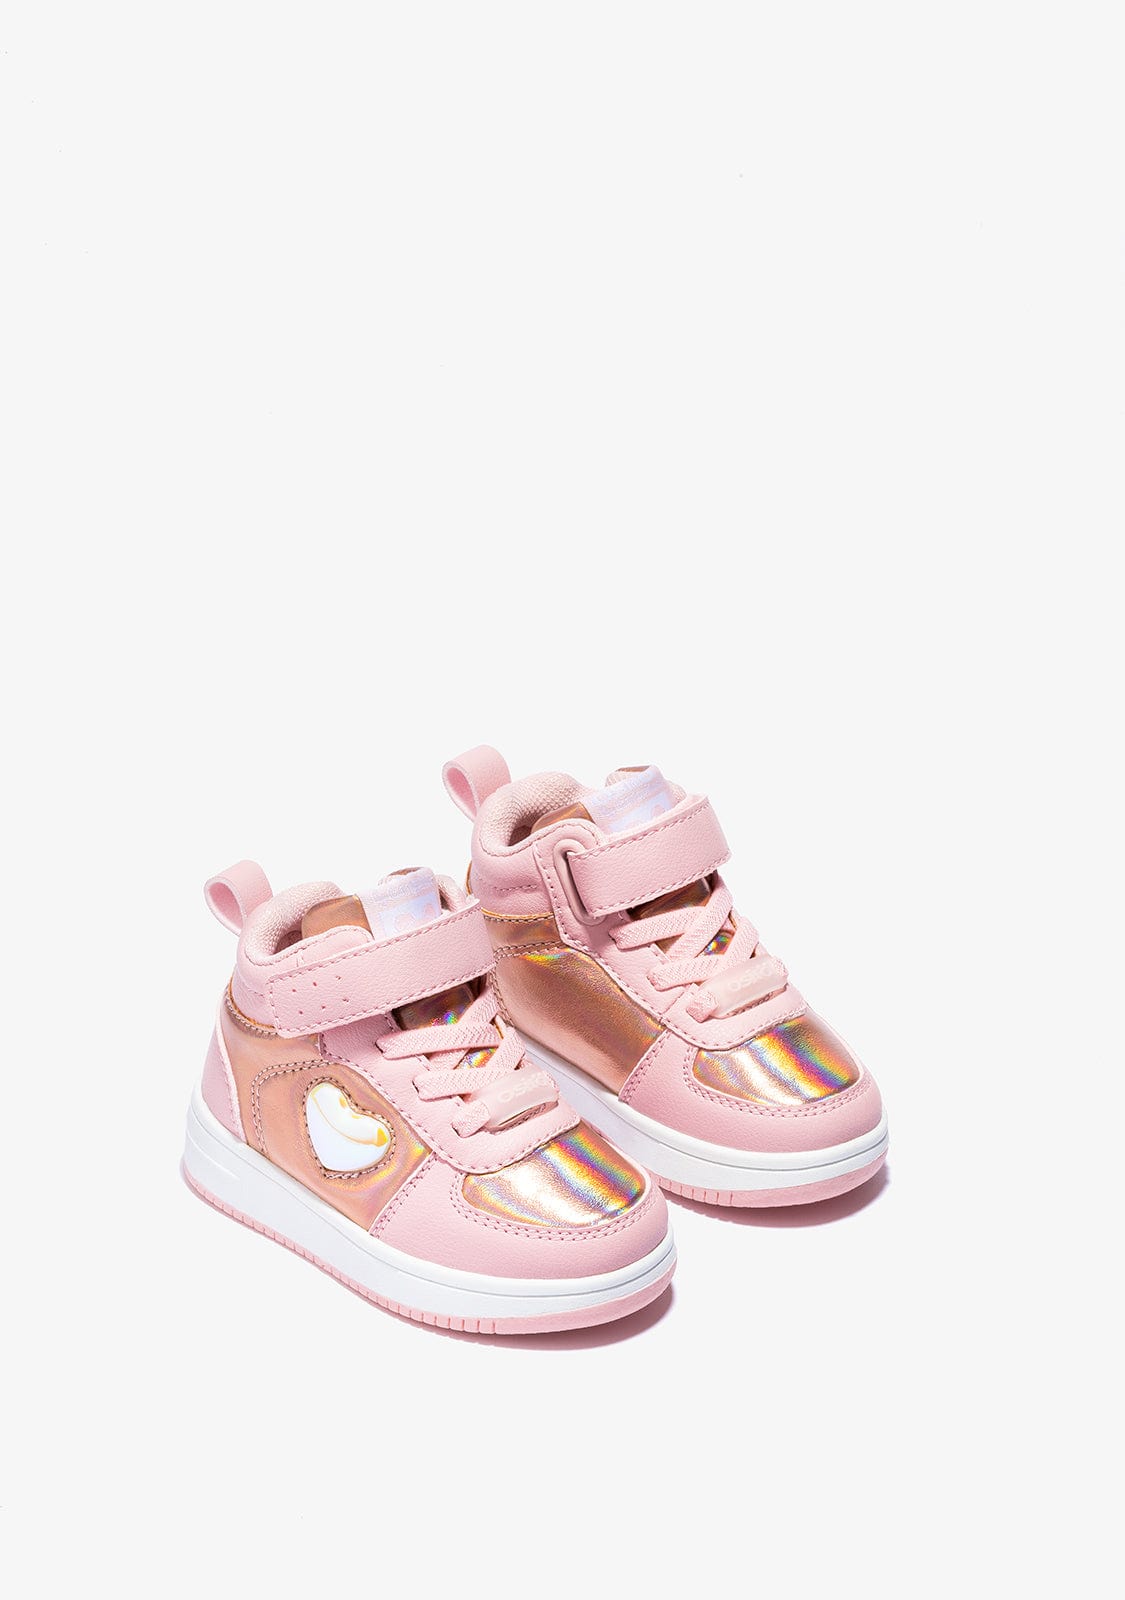 OSITO Shoes Baby's Pink With Lights Heart Hi-Top Sneakers